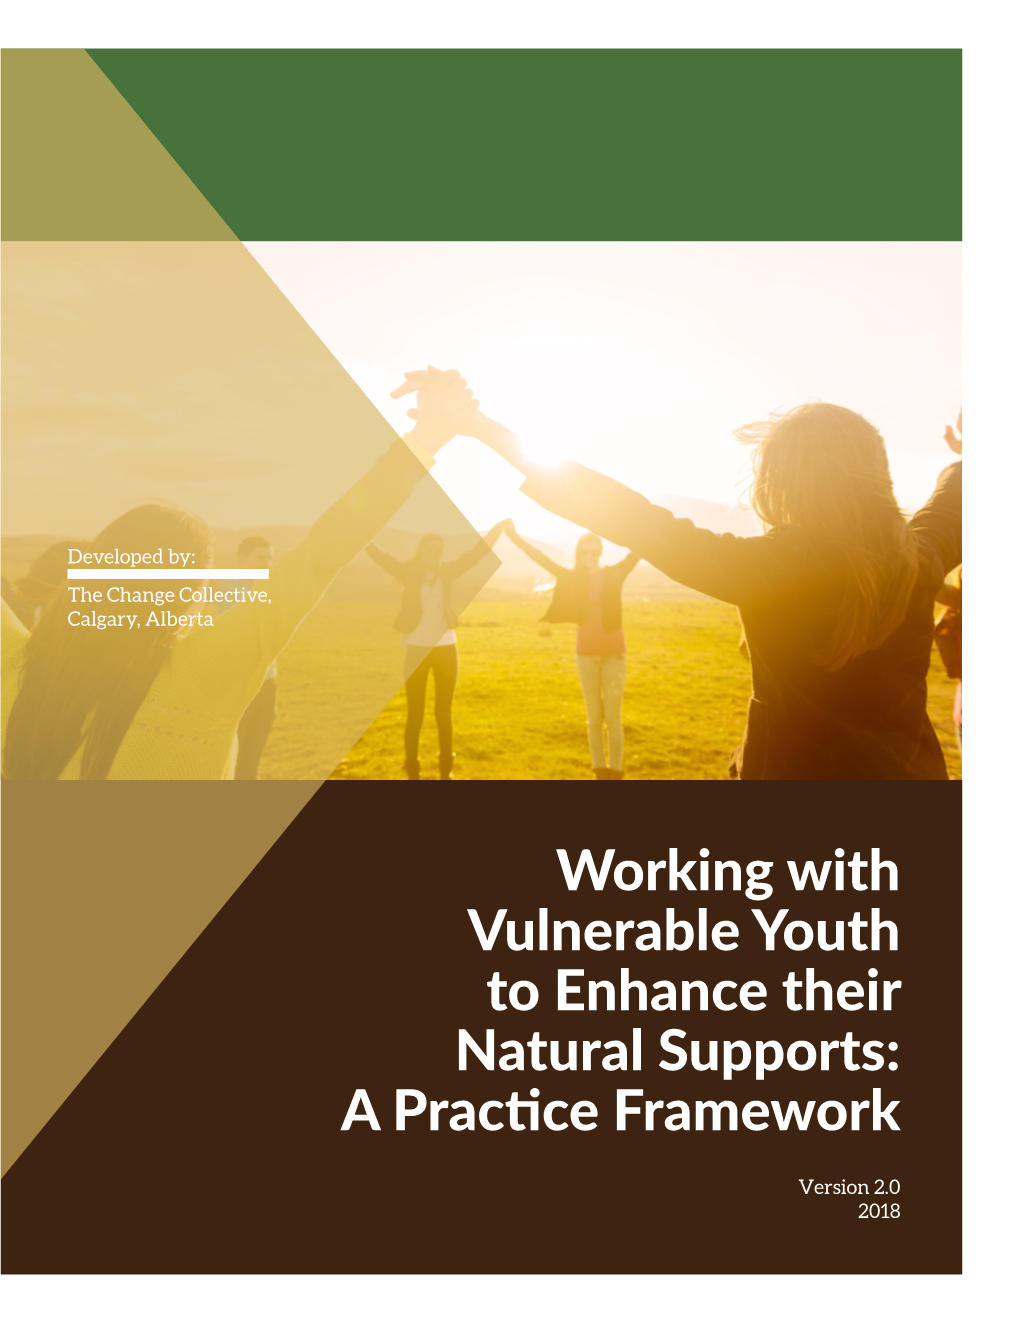 Working with Vulnerable Youth to Enhance Their Natural Supports: a Practice Framework